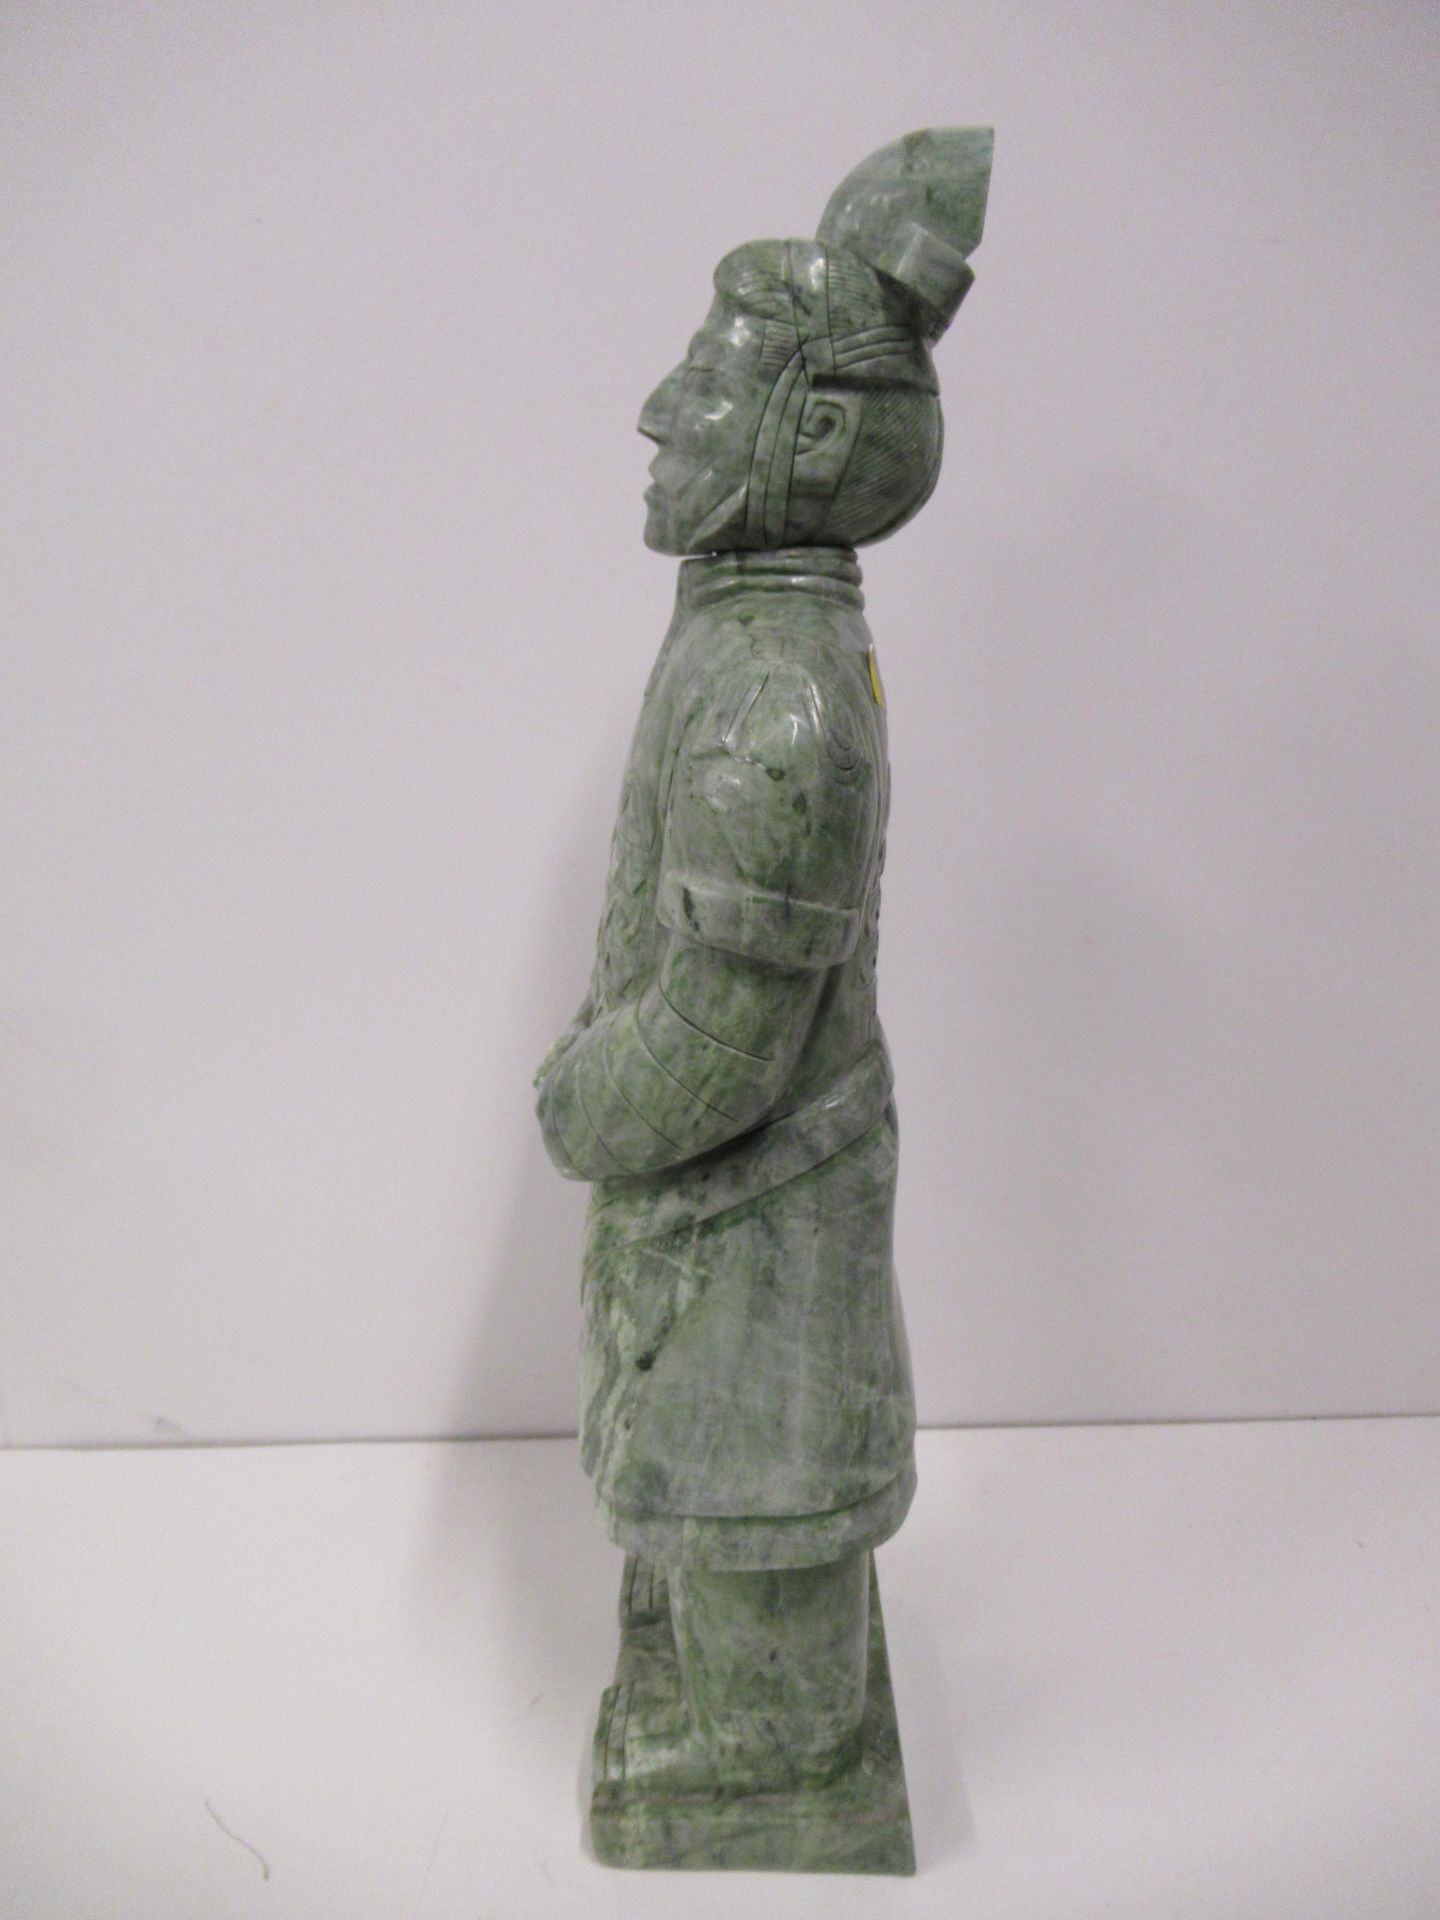 A Large, Heavy 'Jade Green' Stone figure of a Chinese Warrior (75cm tall) Approx.37Kg - Image 4 of 8